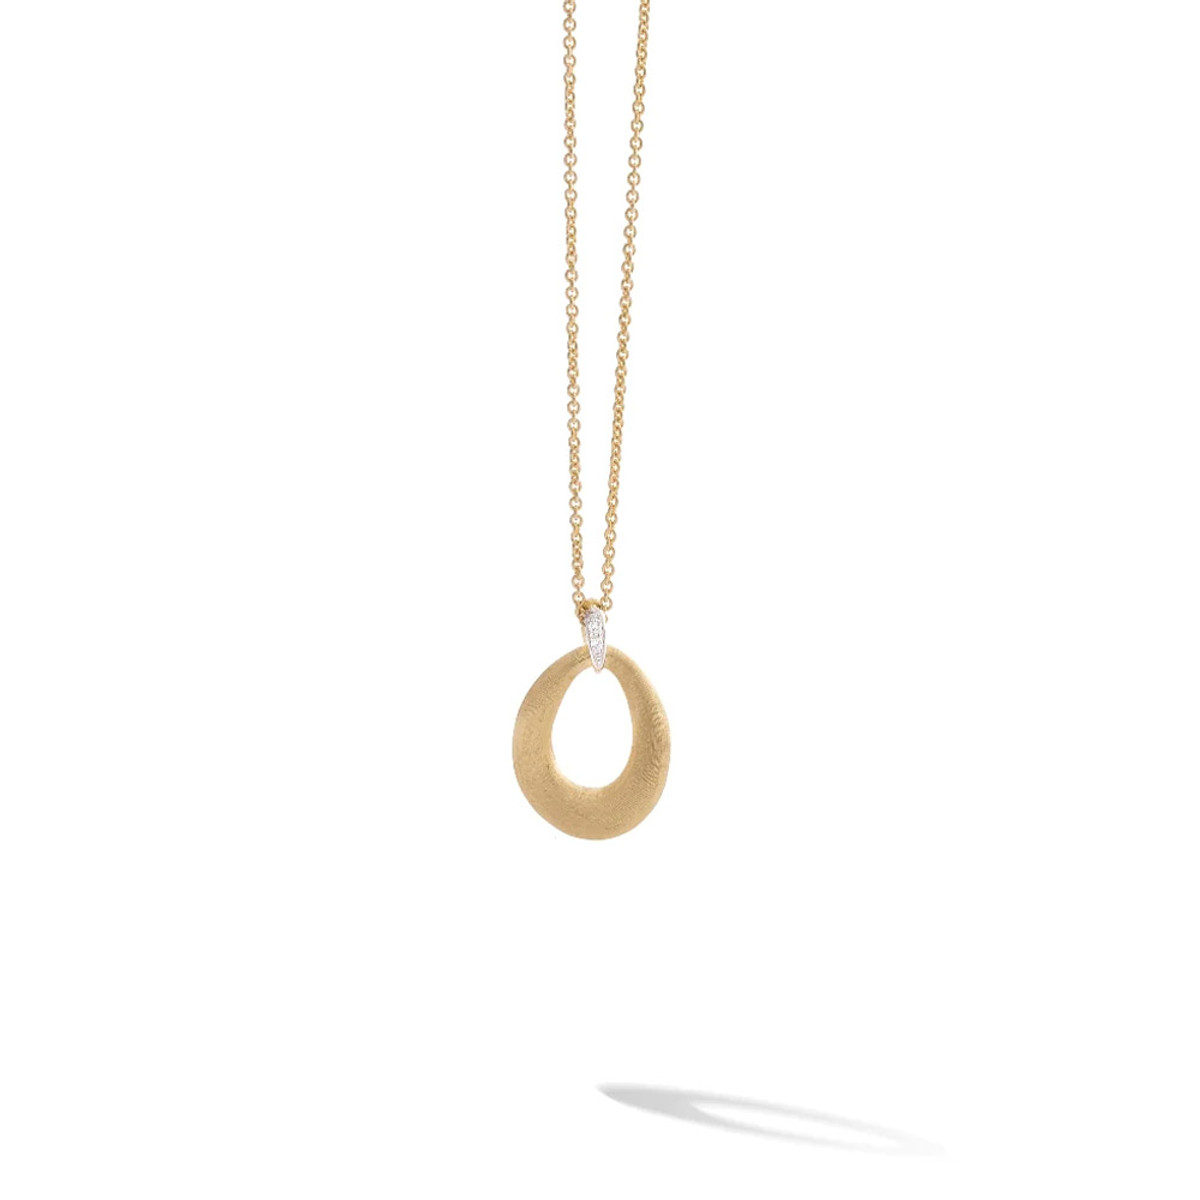 Marco Bicego Lucia Collection 18K Yellow Gold Diamond Loop Pendant-56167 Product Image